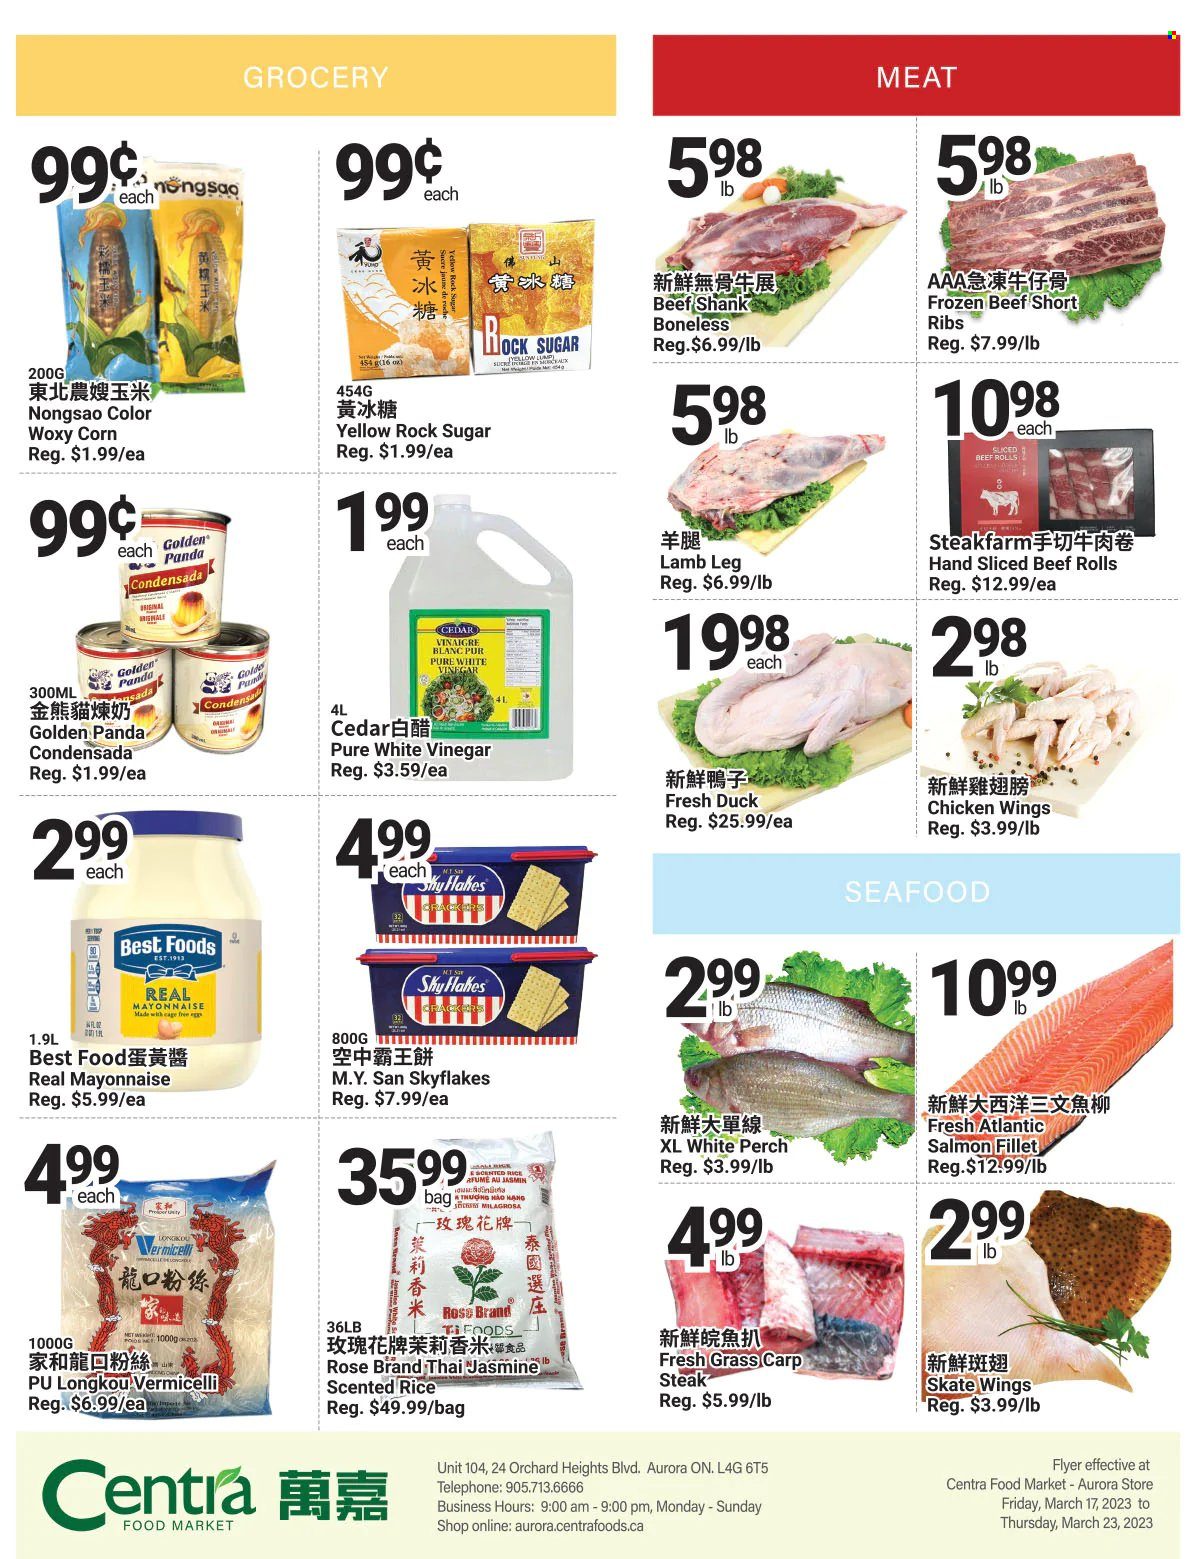 thumbnail - Centra Food Market Flyer - March 17, 2023 - March 23, 2023 - Sales products - corn, salmon, salmon fillet, perch, seafood, carp, eggs, cage free eggs, mayonnaise, chicken wings, Skyflakes, rice, vinegar, rosé wine, chicken, beef meat, beef ribs, beef shank, steak, ribs, lamb meat, lamb leg, bag. Page 4.